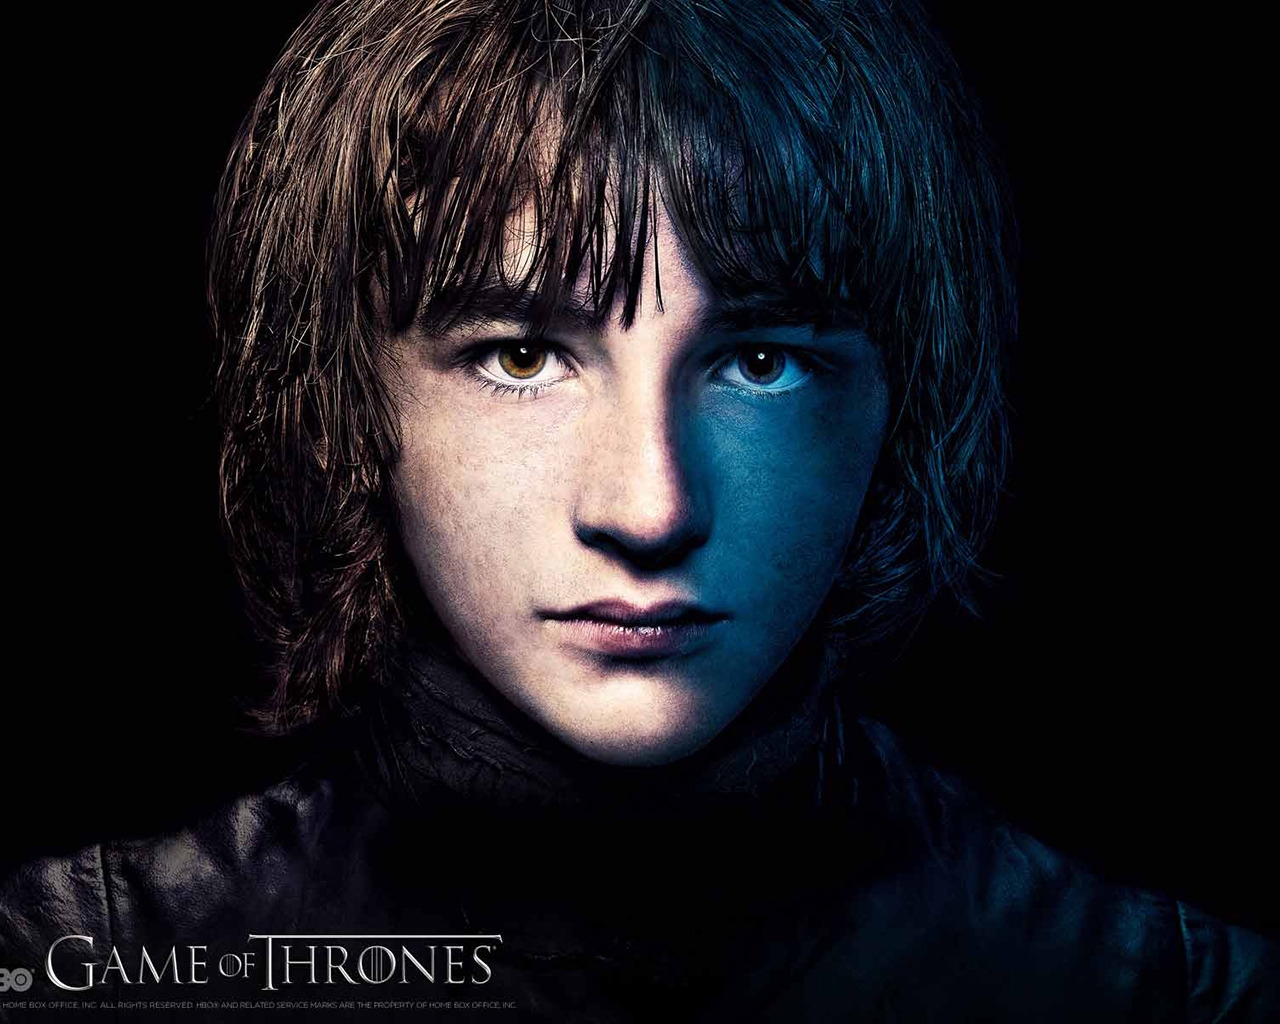 Bran Stark in Game of Thrones for 1280 x 1024 resolution